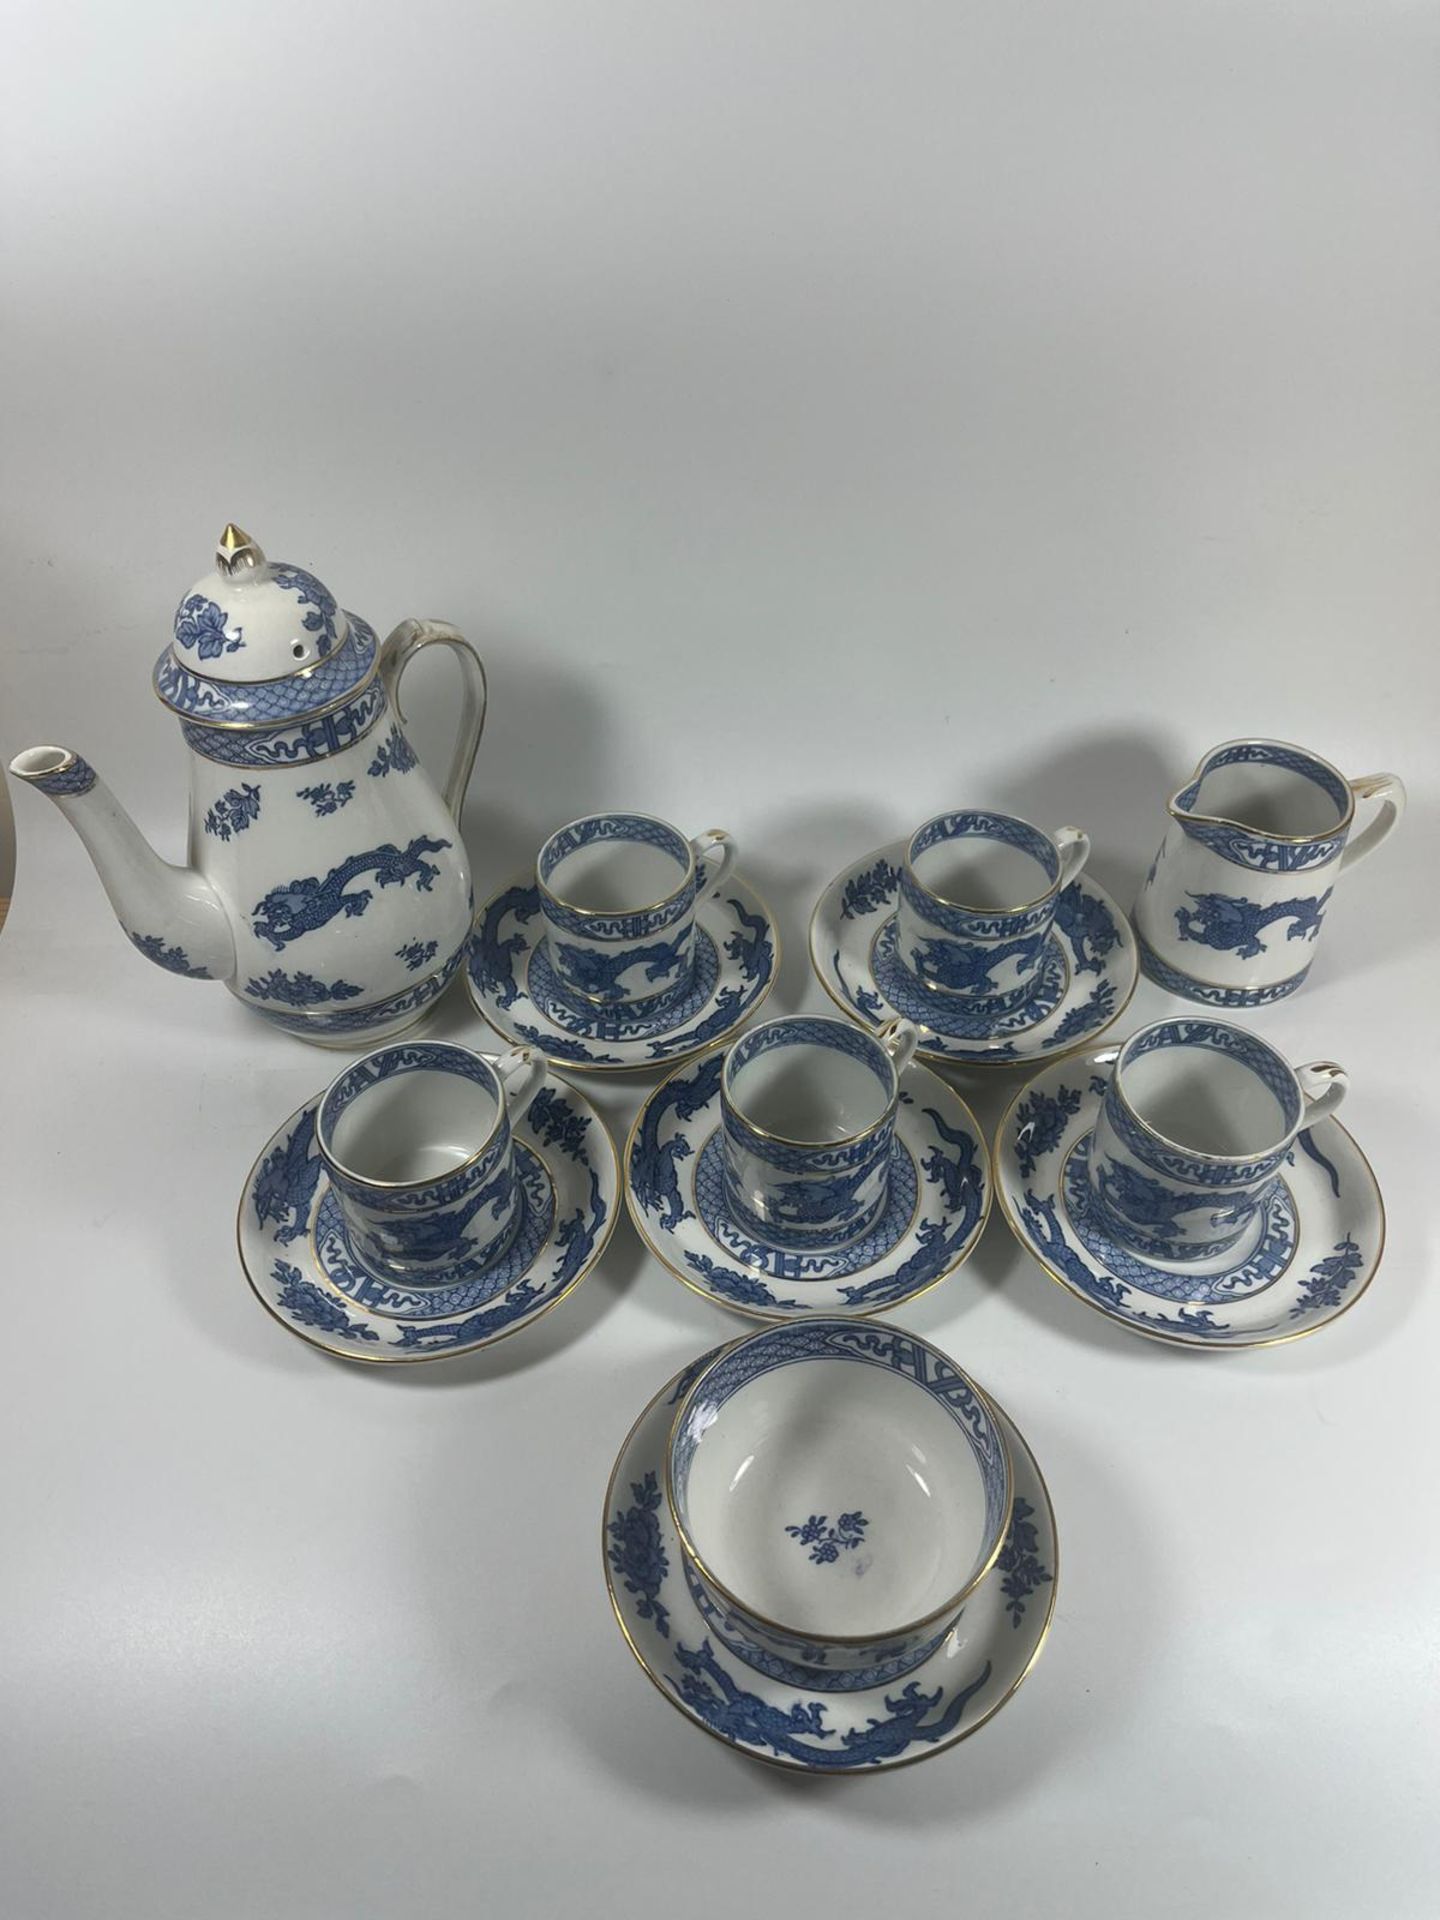 AN ART DECO 1920S BOOTHS BLUE AND WHITE DRAGON PATTERN TEA SET, TEAPOT HEIGHT 19 CM - Image 4 of 6